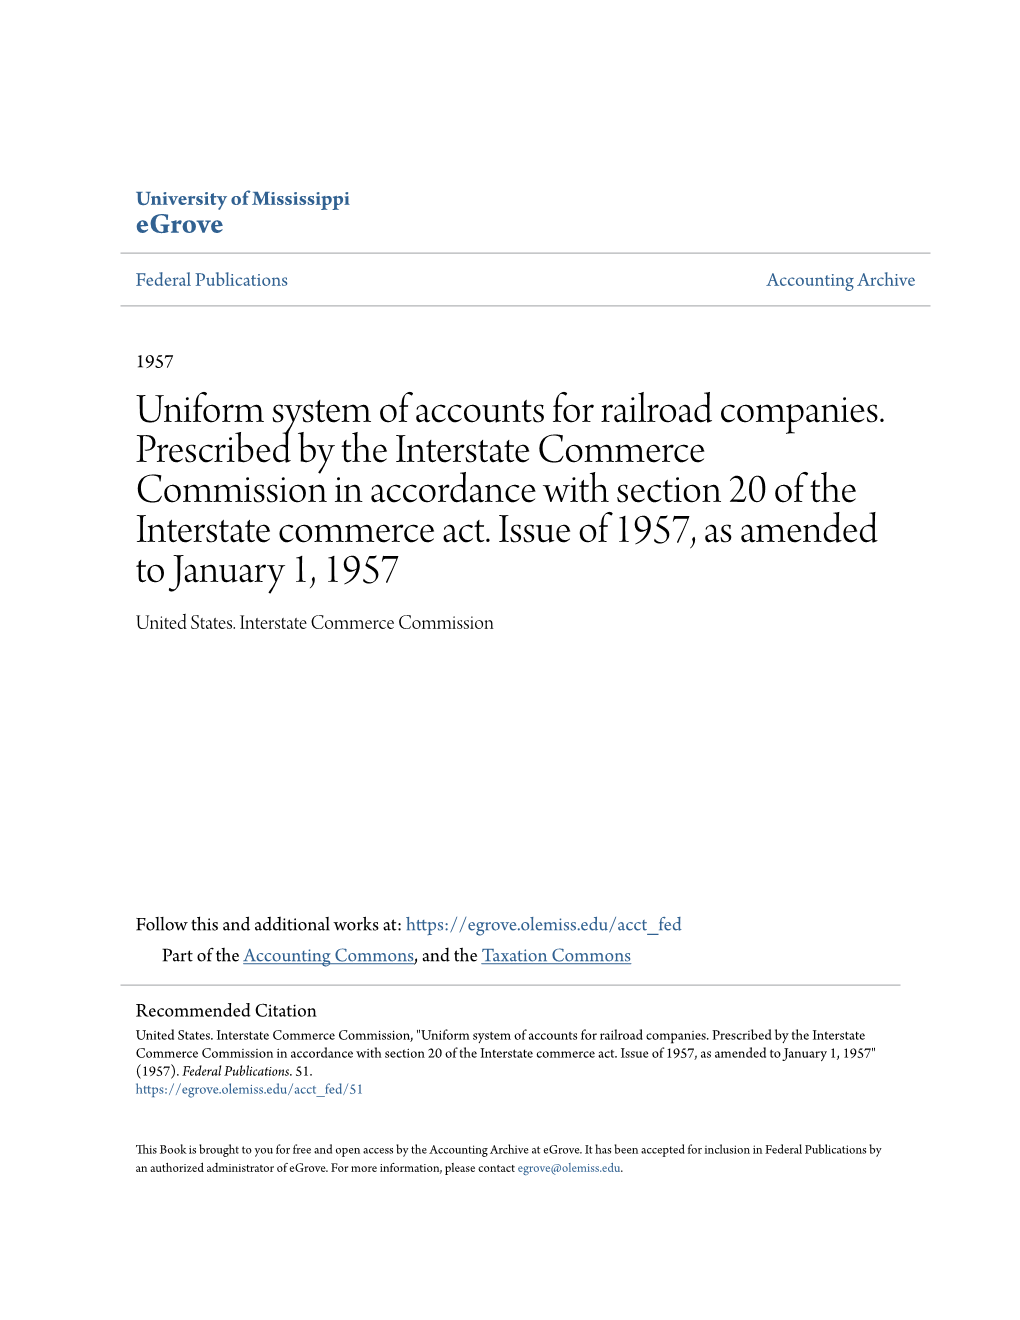 Uniform System of Accounts for Railroad Companies. Prescribed by the Interstate Commerce Commission in Accordance with Section 20 of the Interstate Commerce Act